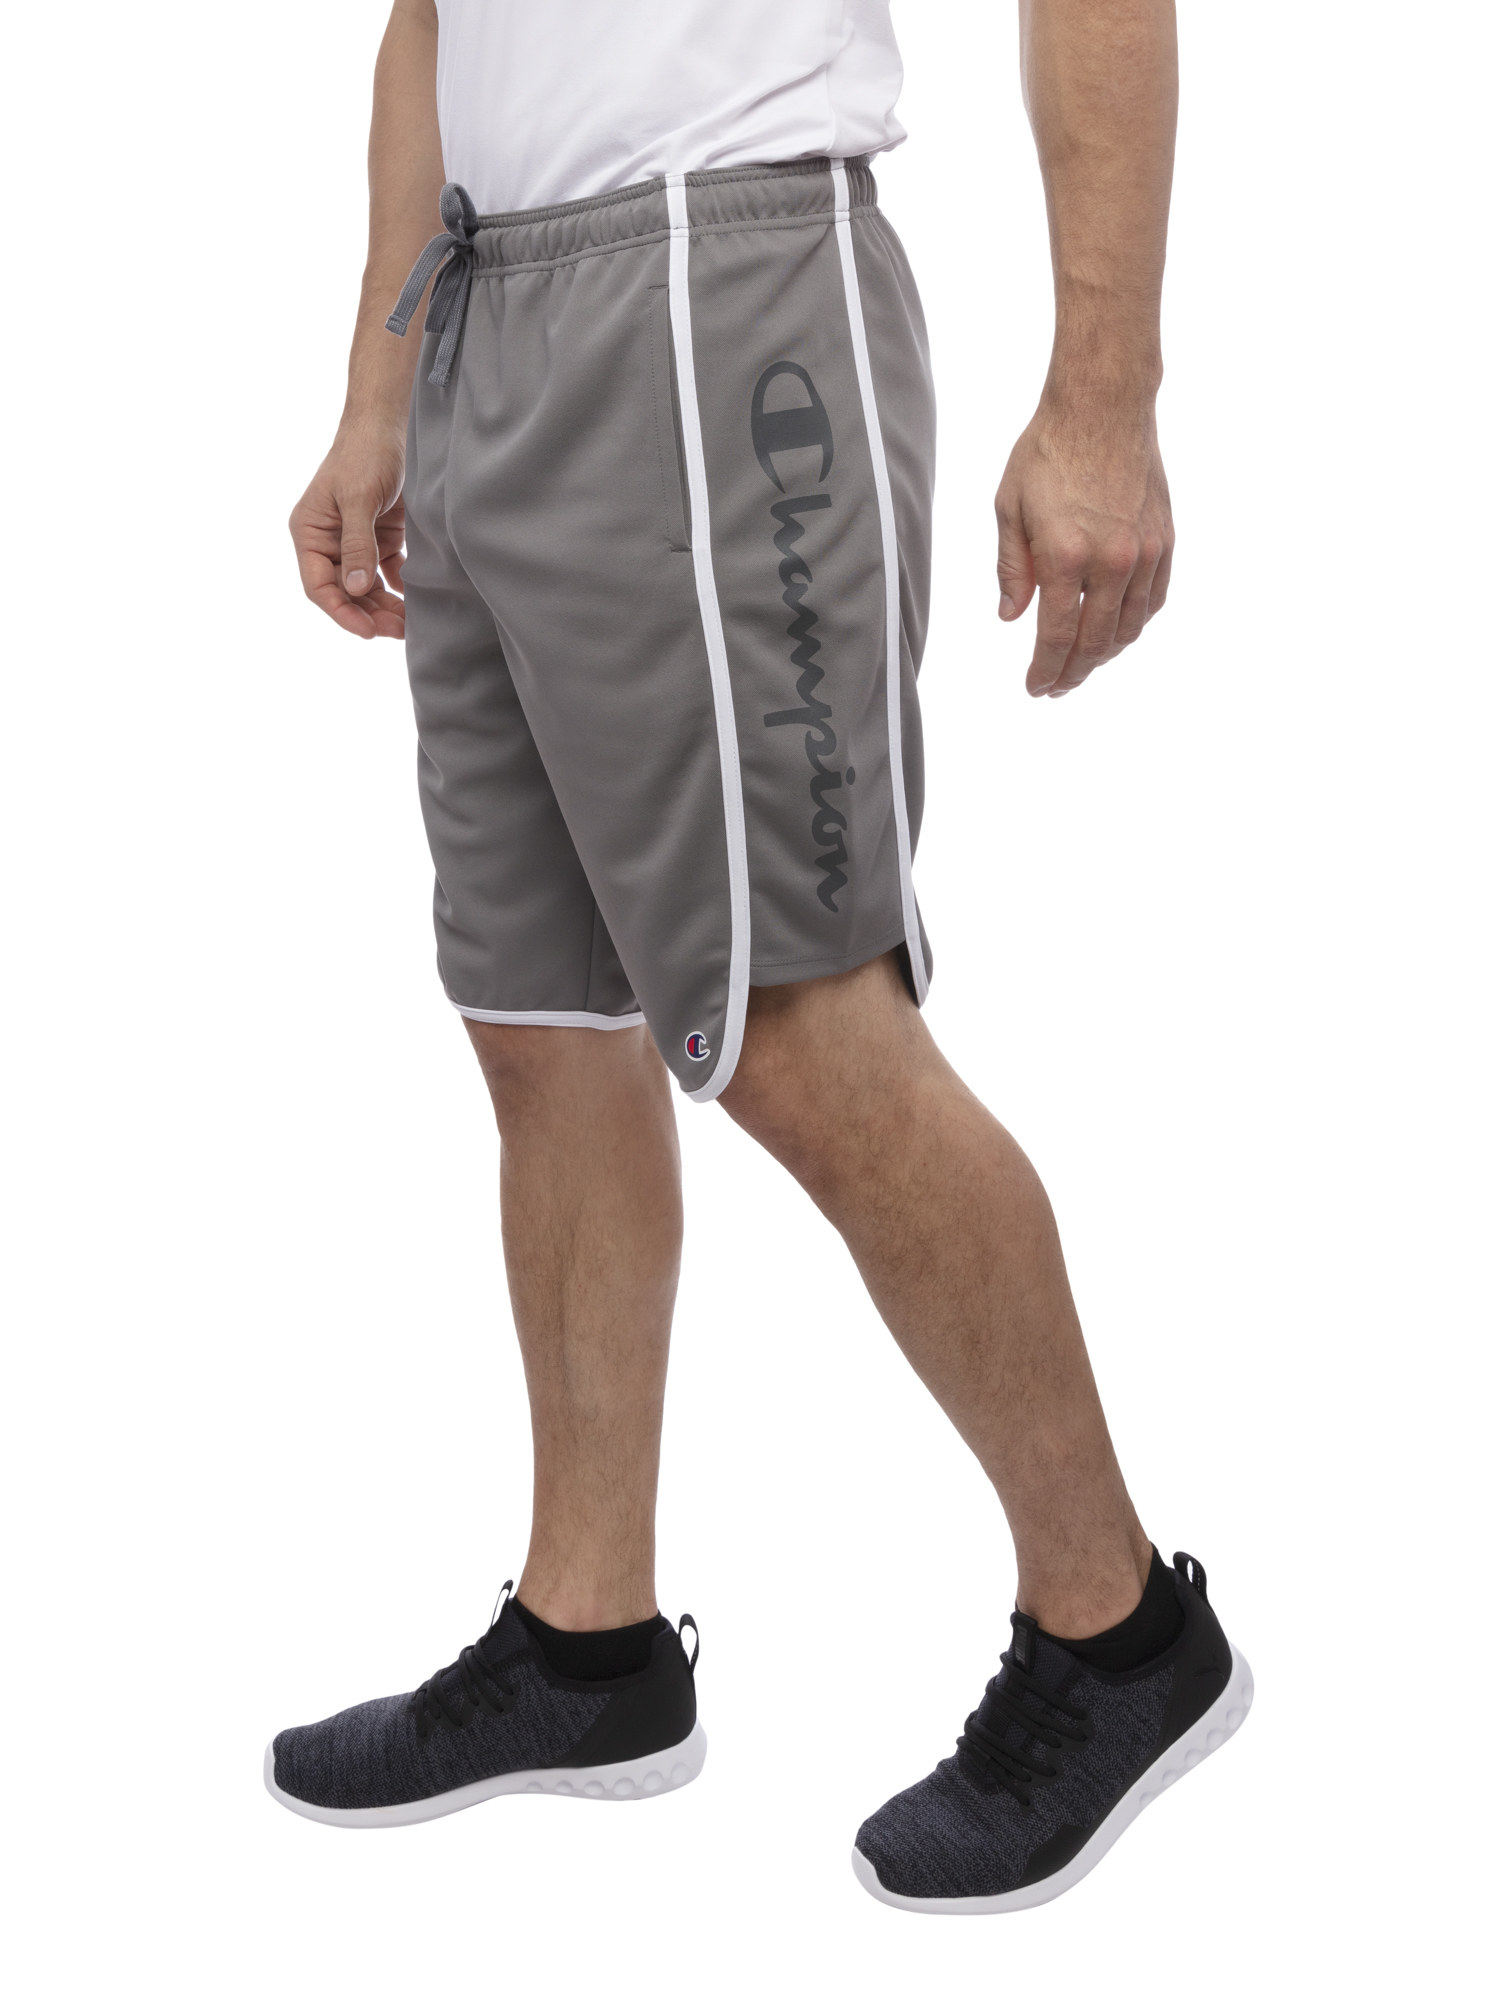 model wearing the grey shorts with black shoes